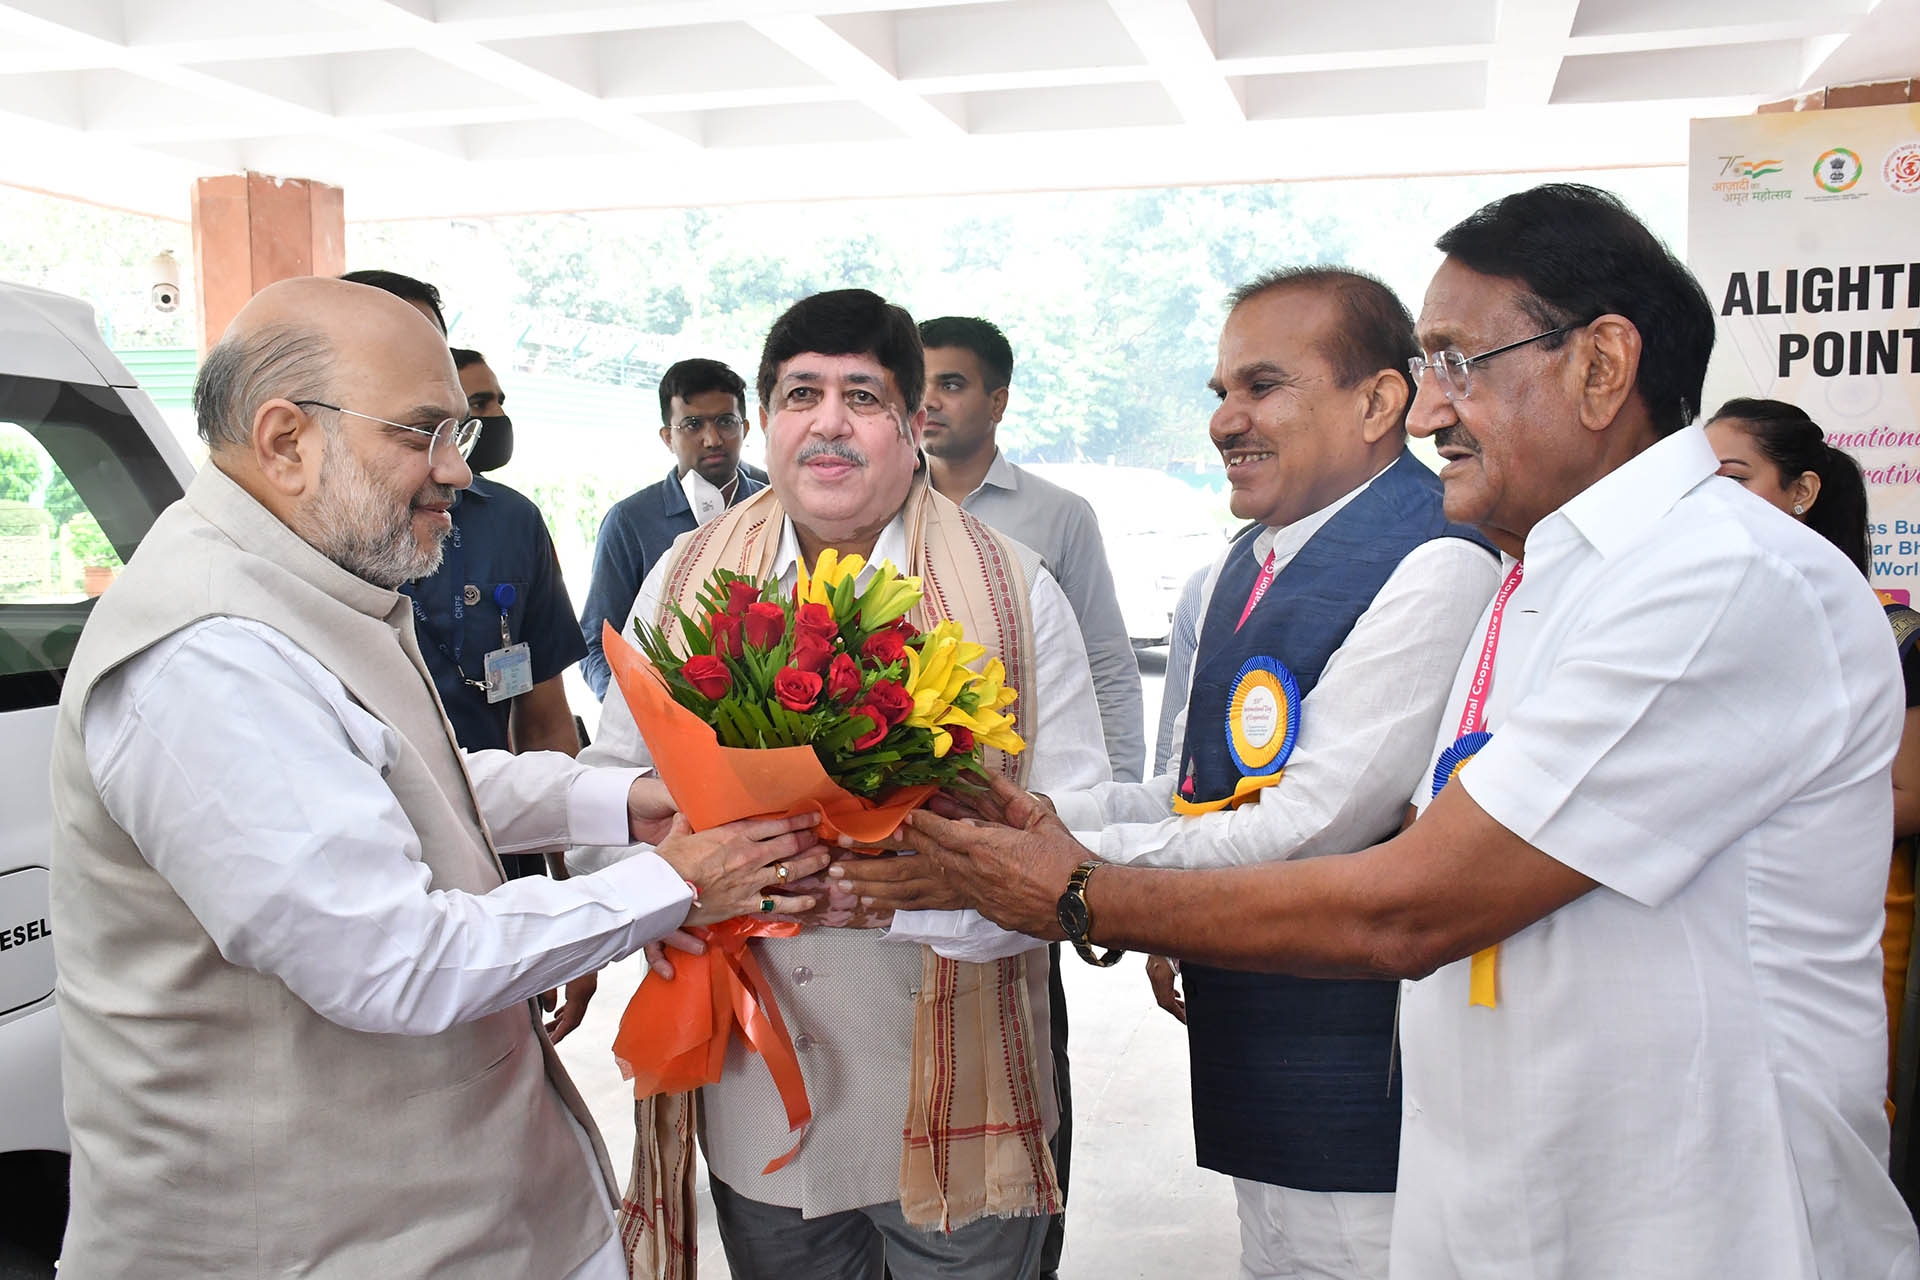 Welcoming the Chief Guest Shri Amit Shah on the 100th International Day of Cooperatives